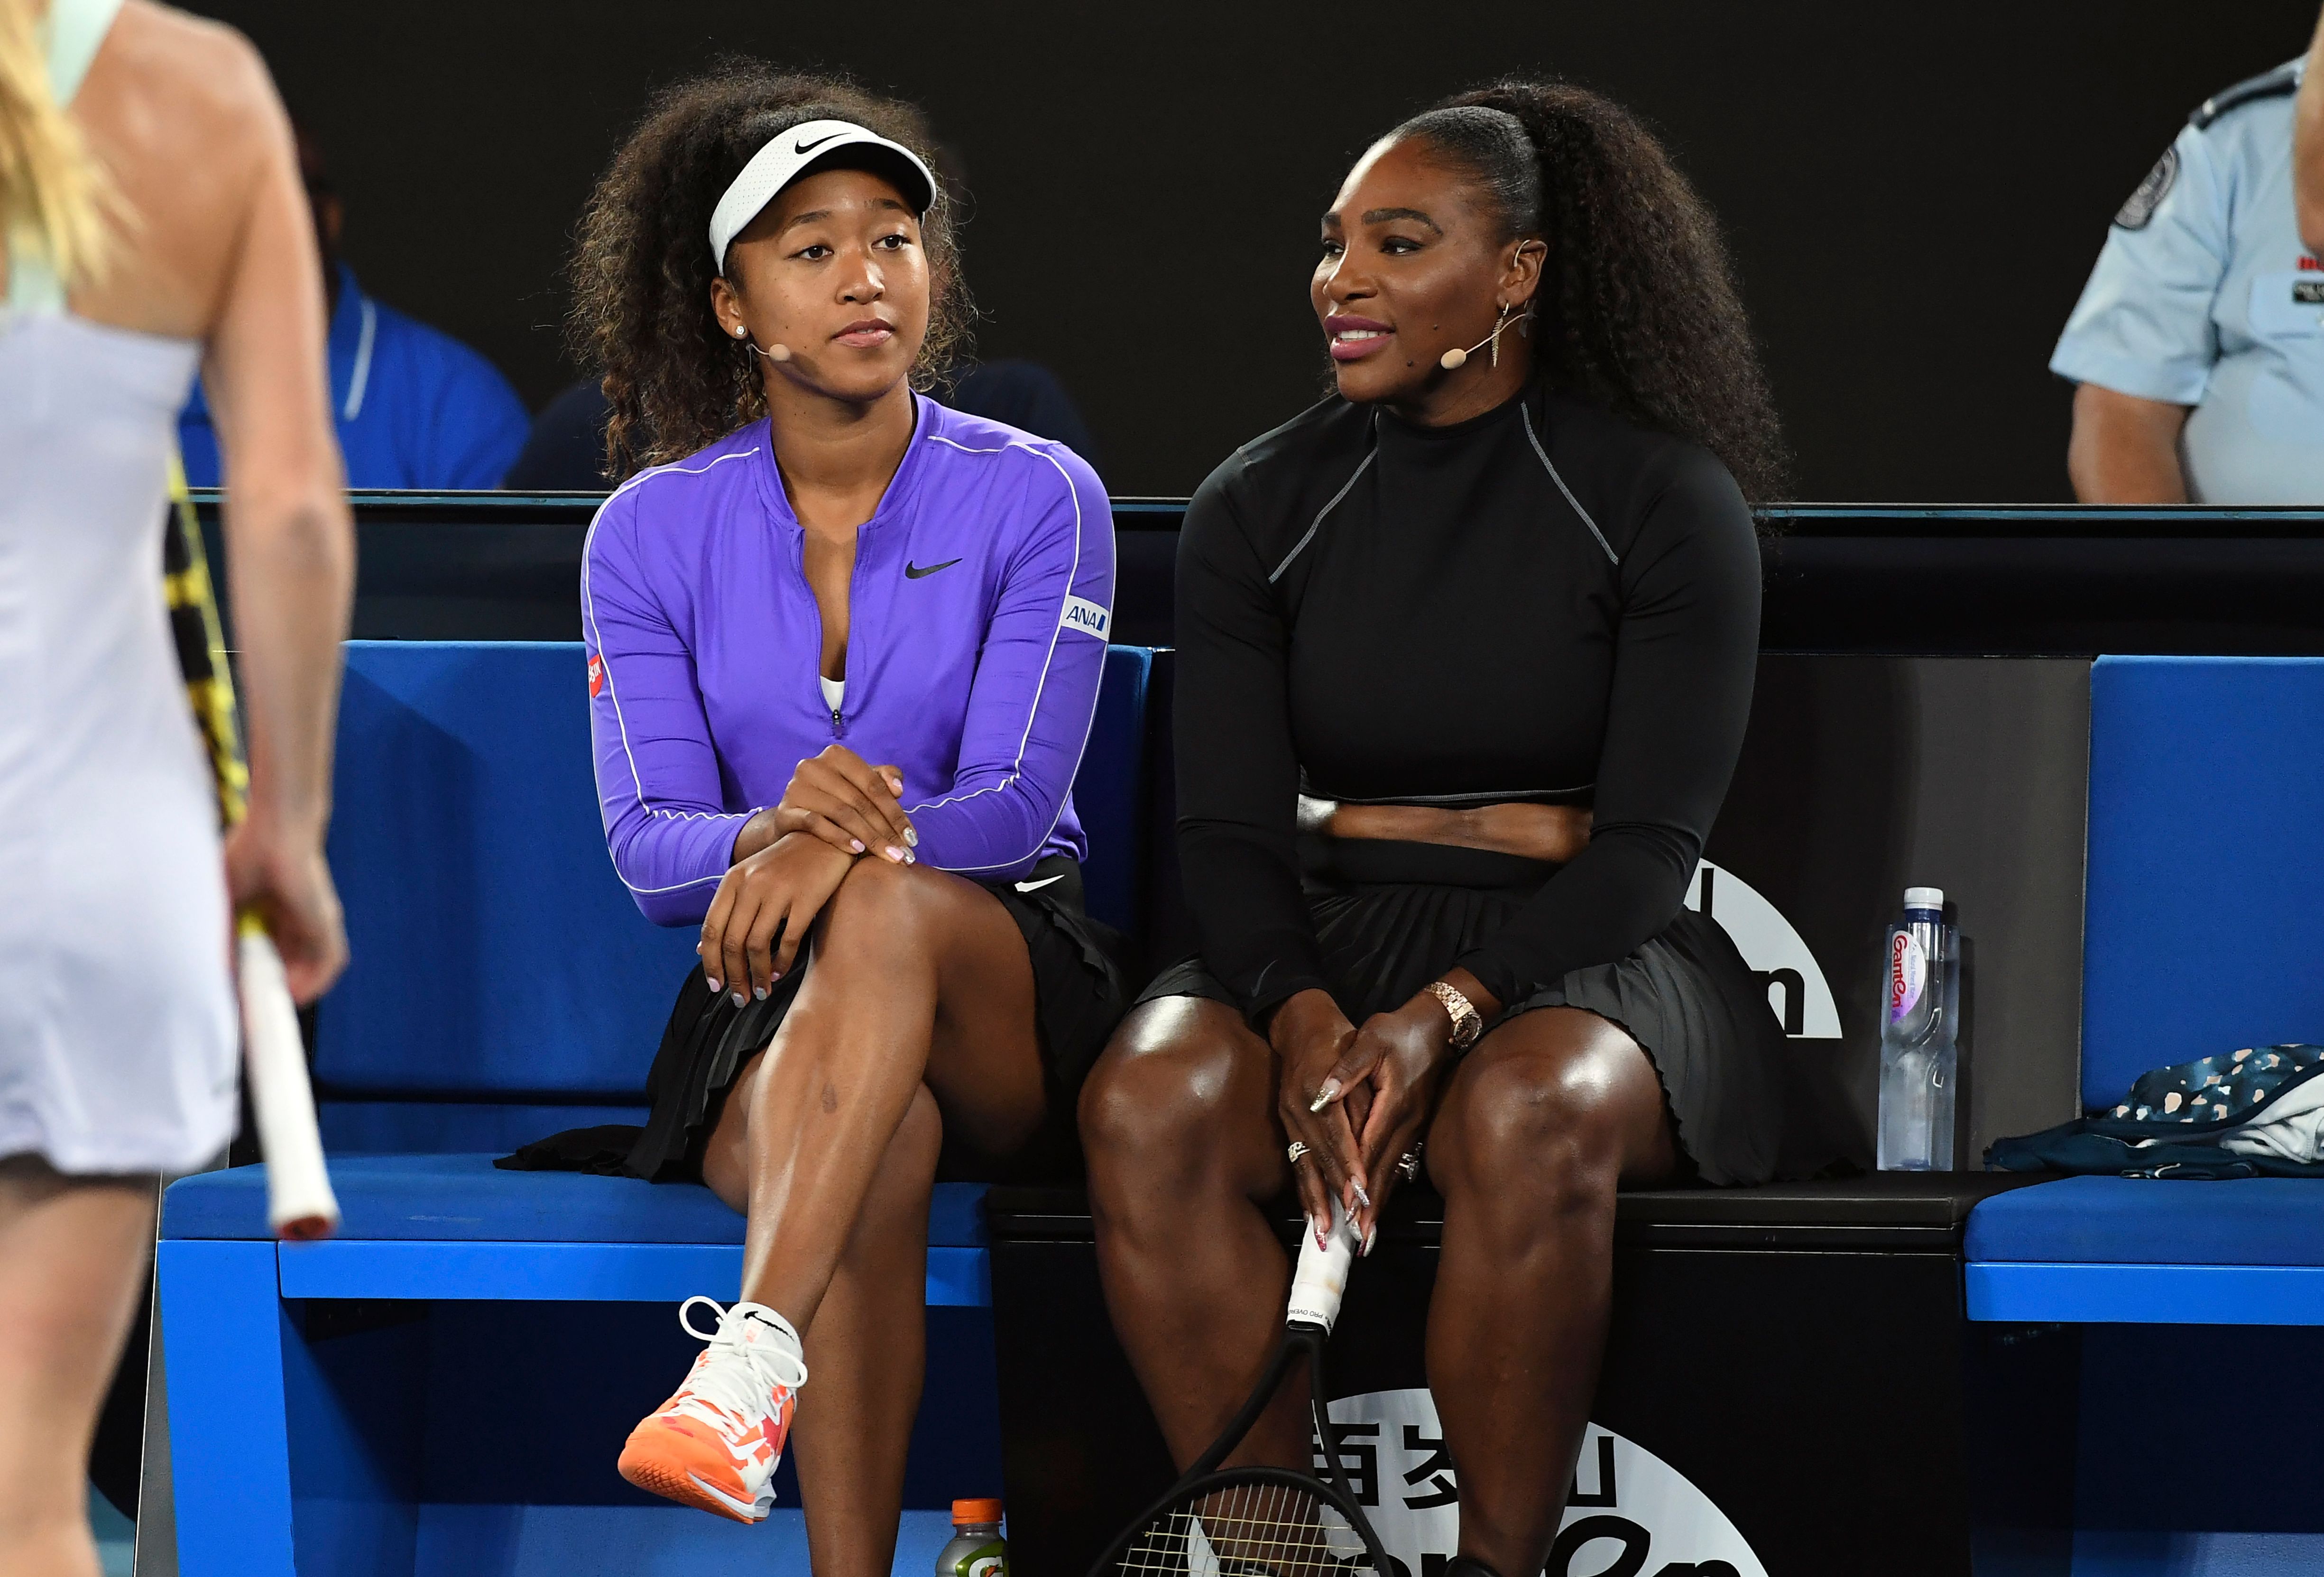 Tennis player Naomi Osaka claps back at two fans after they criticize her f...